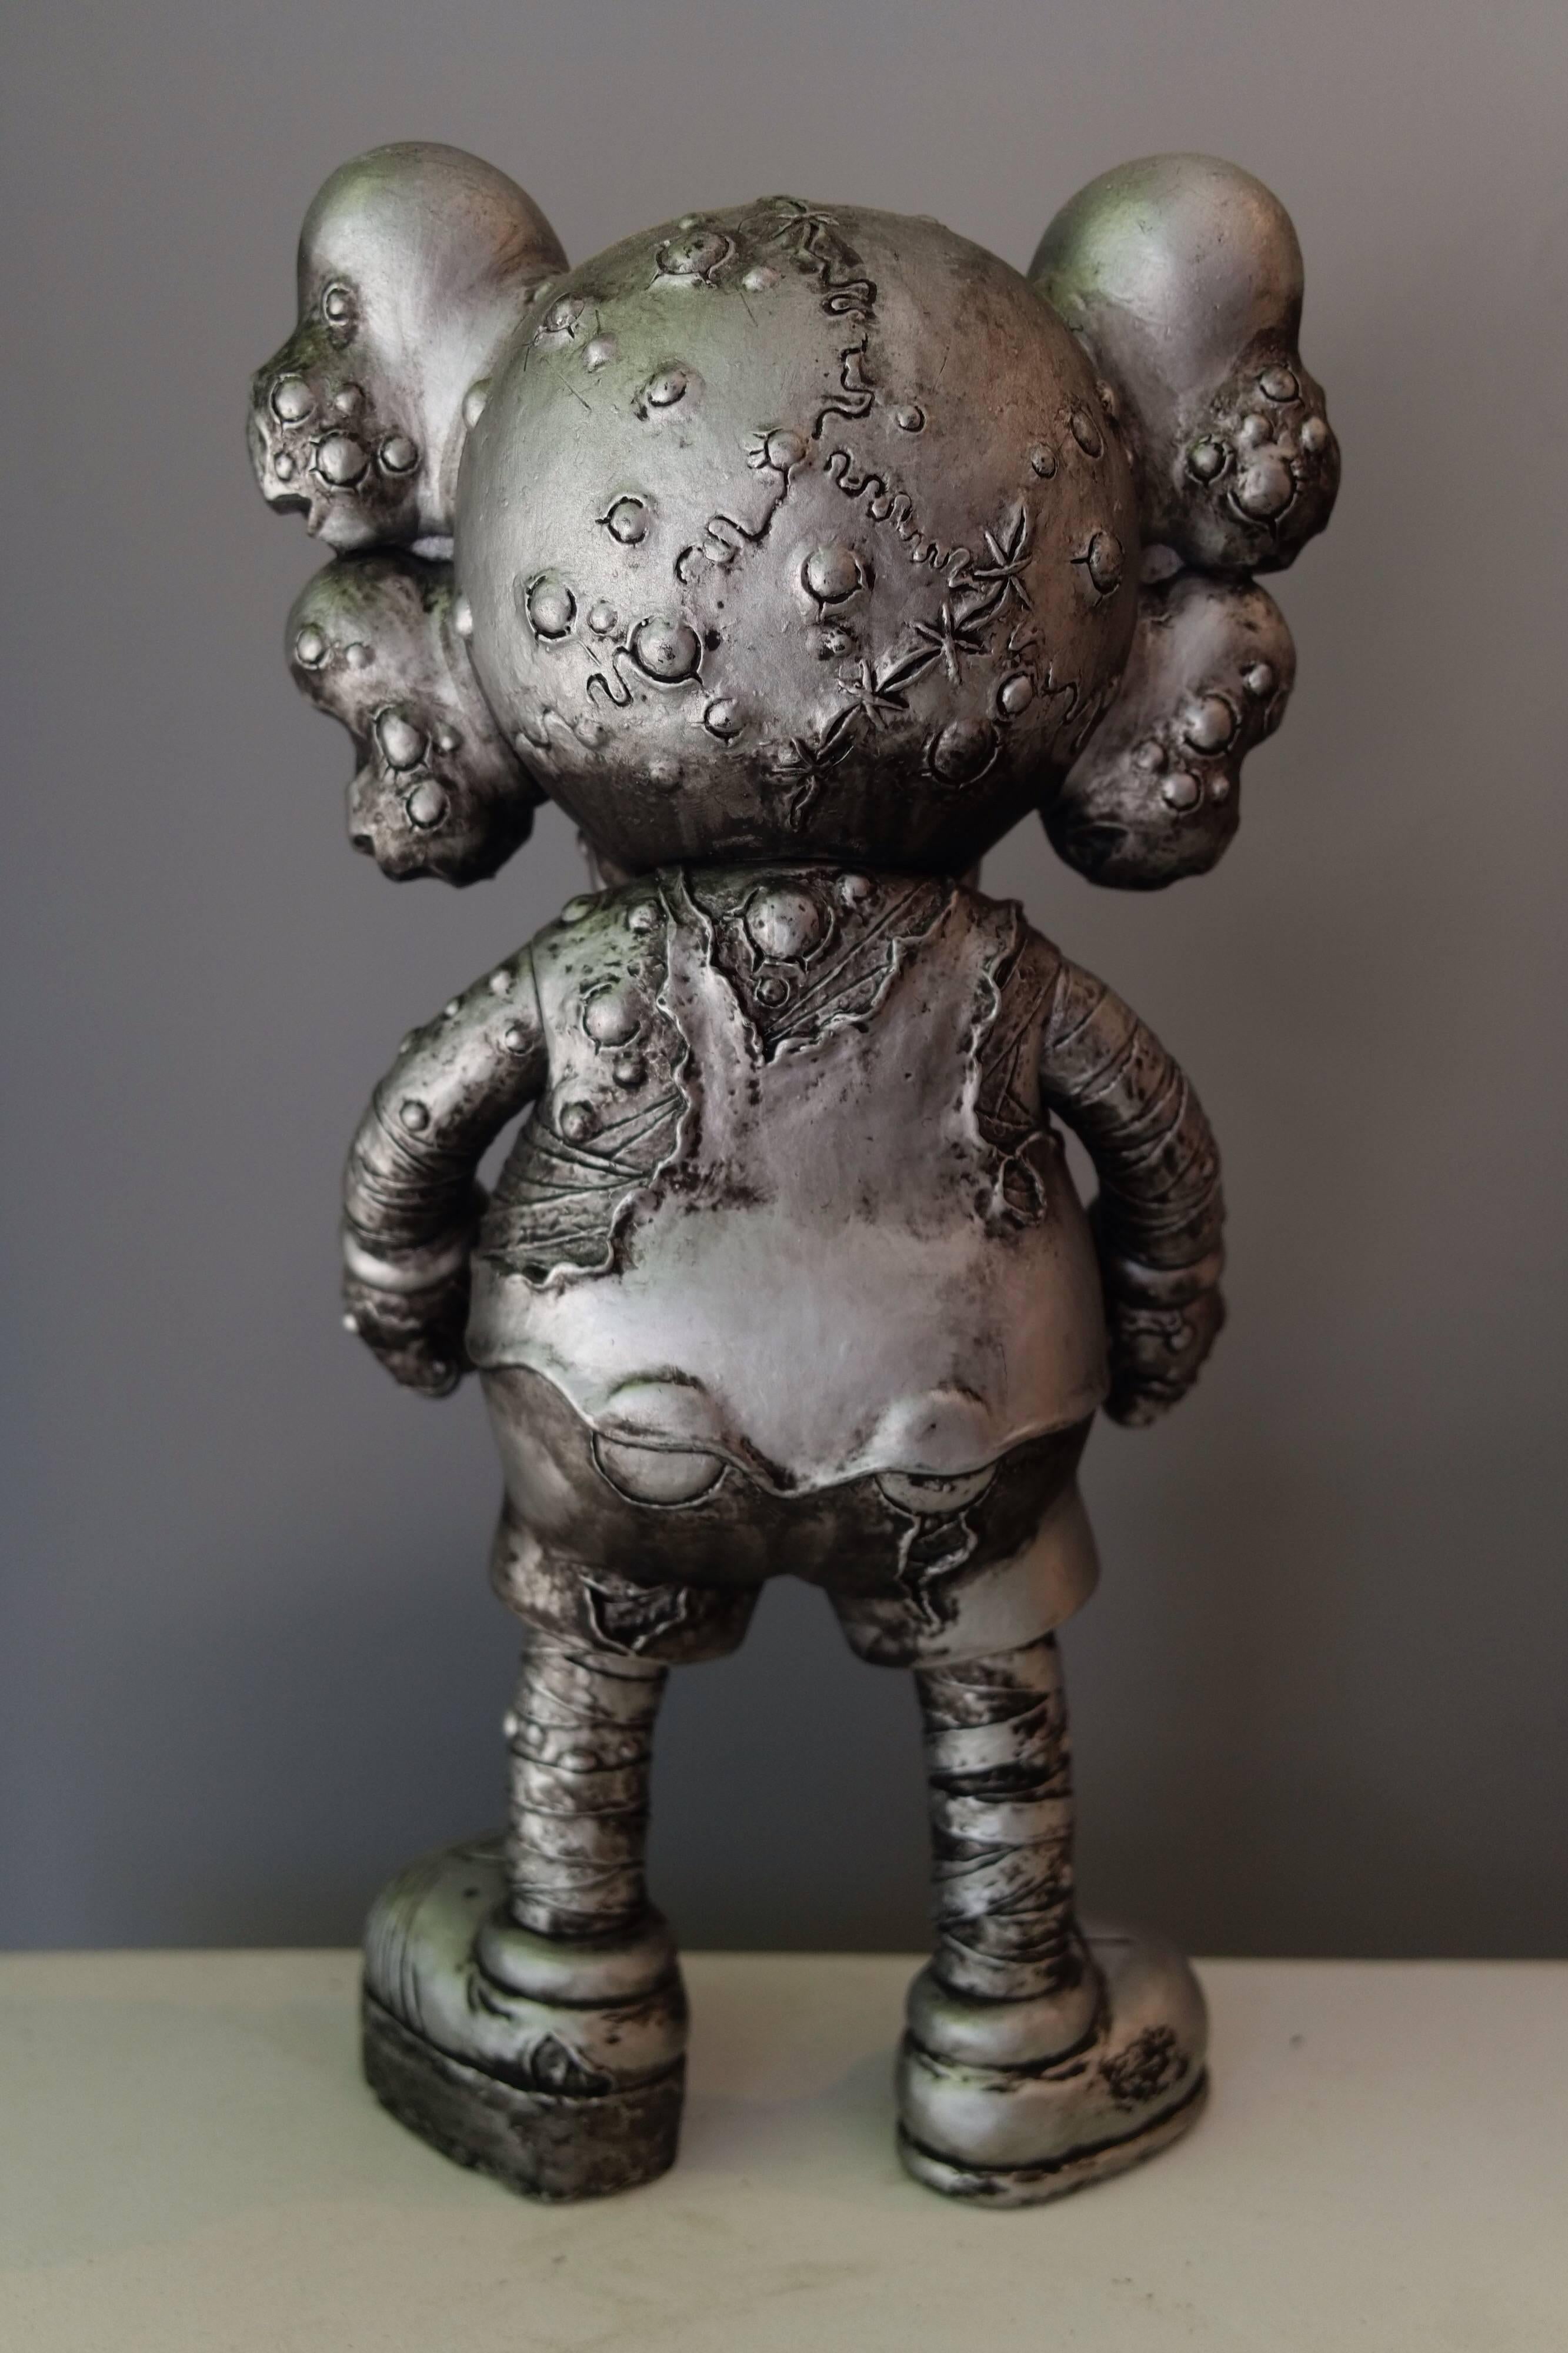 Kaws, Pushhead Version Companion, 2005. 
Kawsone(dot)com. 

Silver. Sculpted by Cosmo Liquid.
Painted cast vinyl. 
From an edition of 500. 
In its original packaging / box. 
Produced and manufactured Medicom Toy Corporation, China. 

About